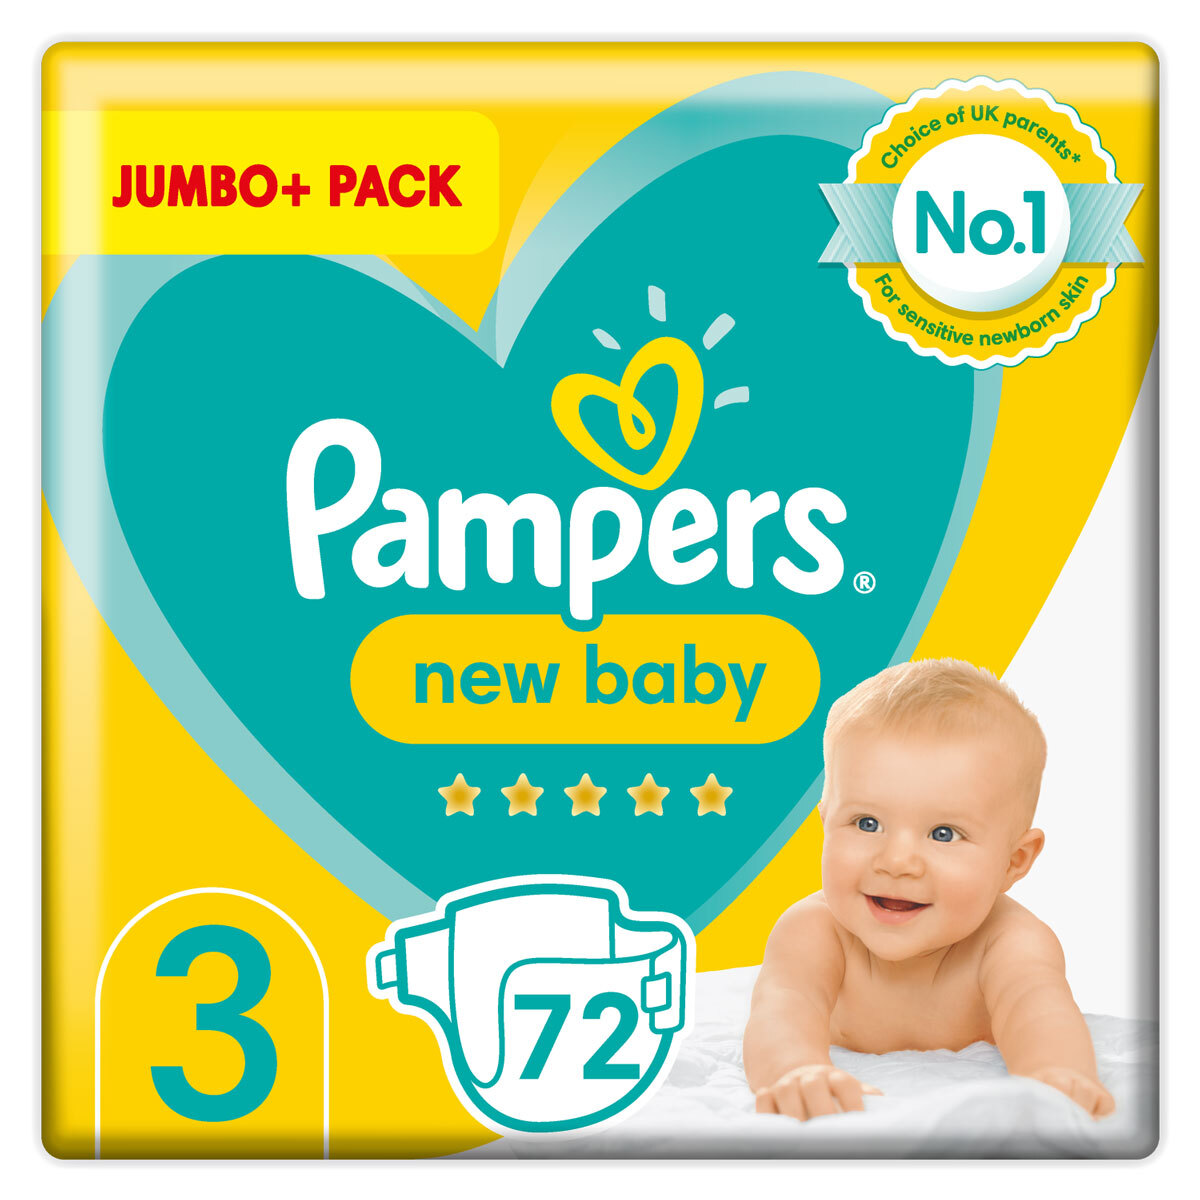 Pampers New Baby Nappies Size 3, Jumbo+ 72 Pack